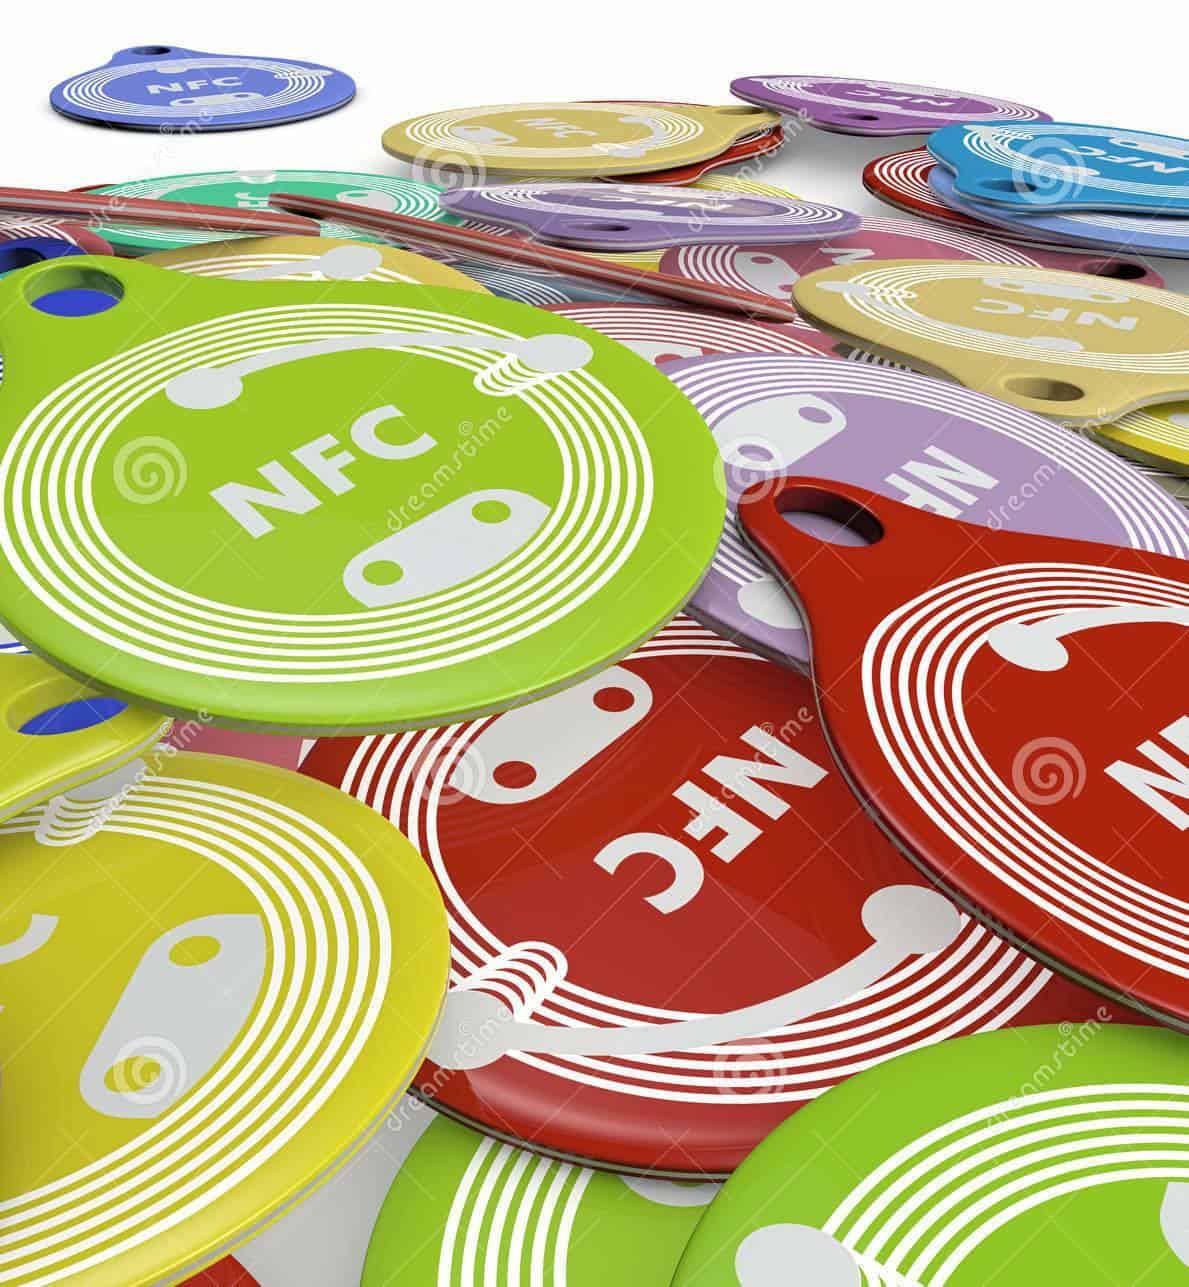 10 Uses For NFC Tags Straight Out Of The Future | TechVise